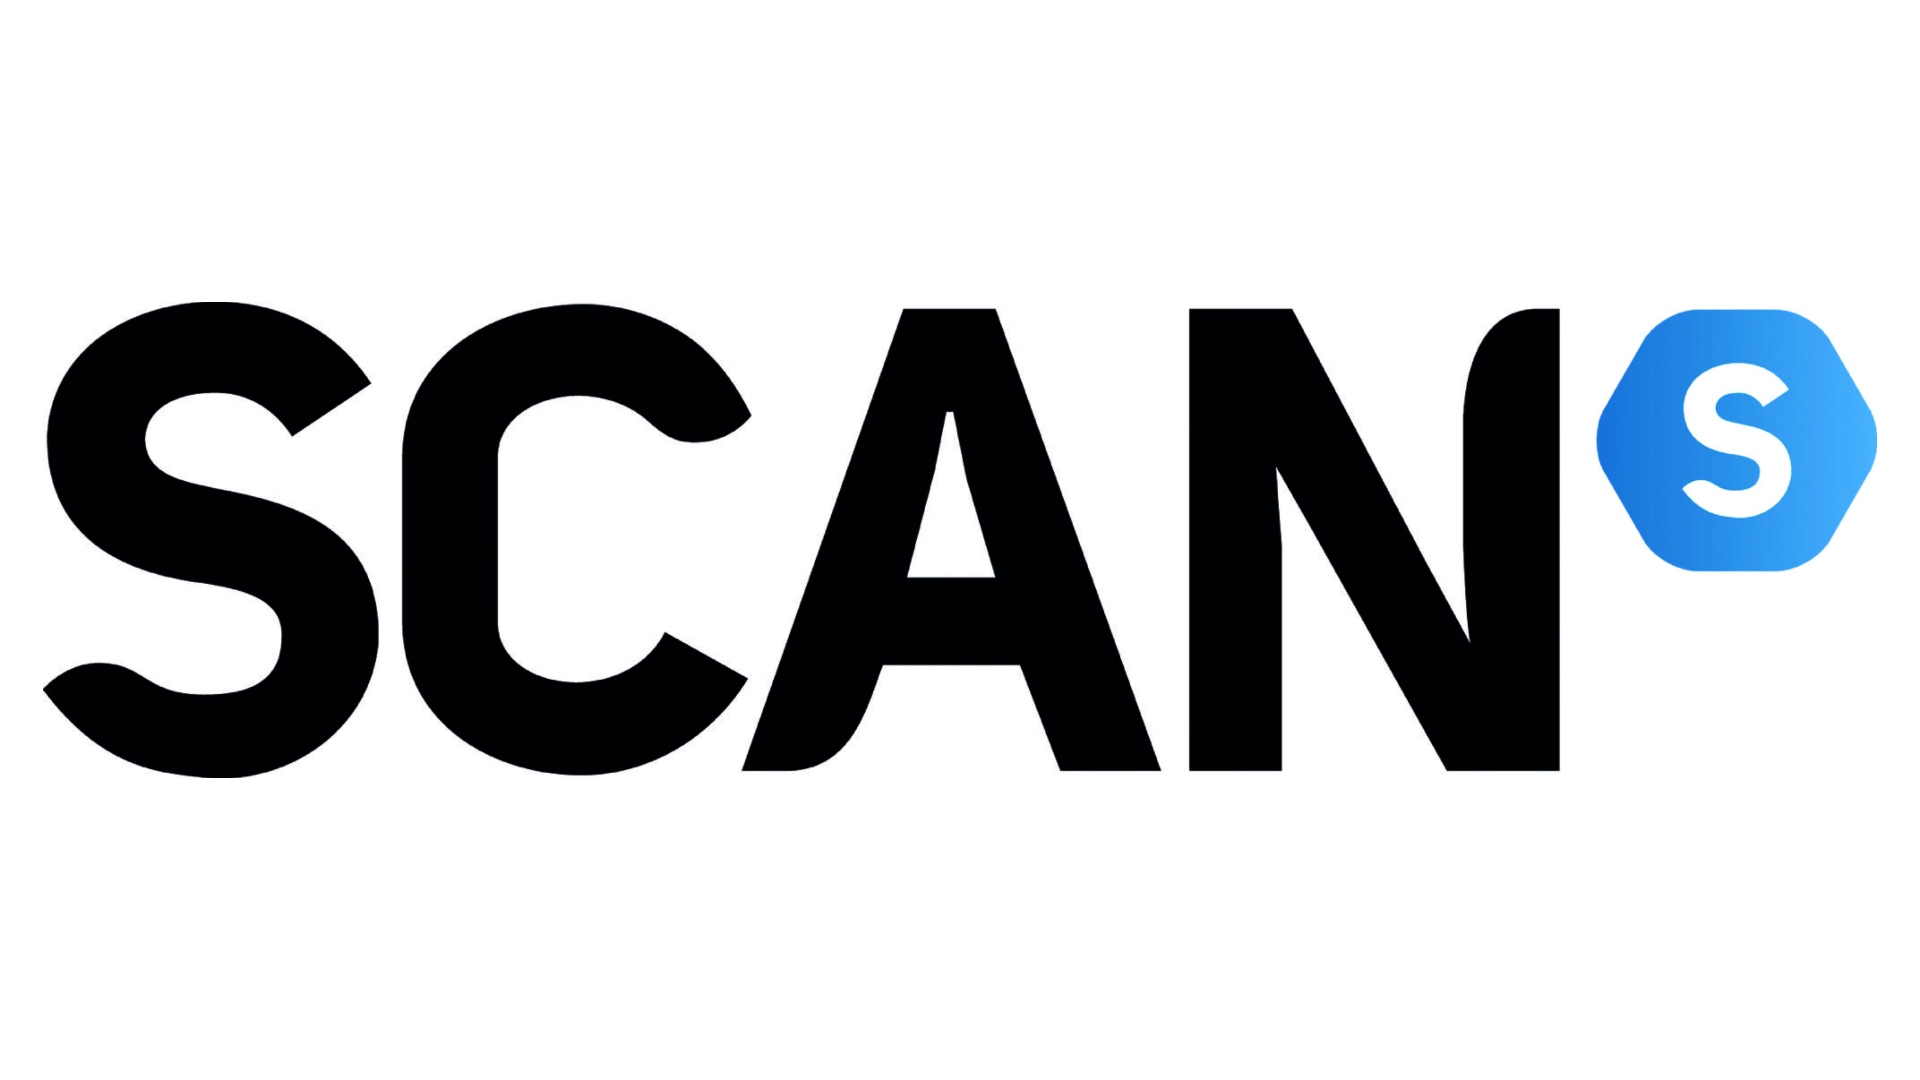 Best Websites for Custom PC Builds, Number 4: Scan UK.  The logo is on a white background.